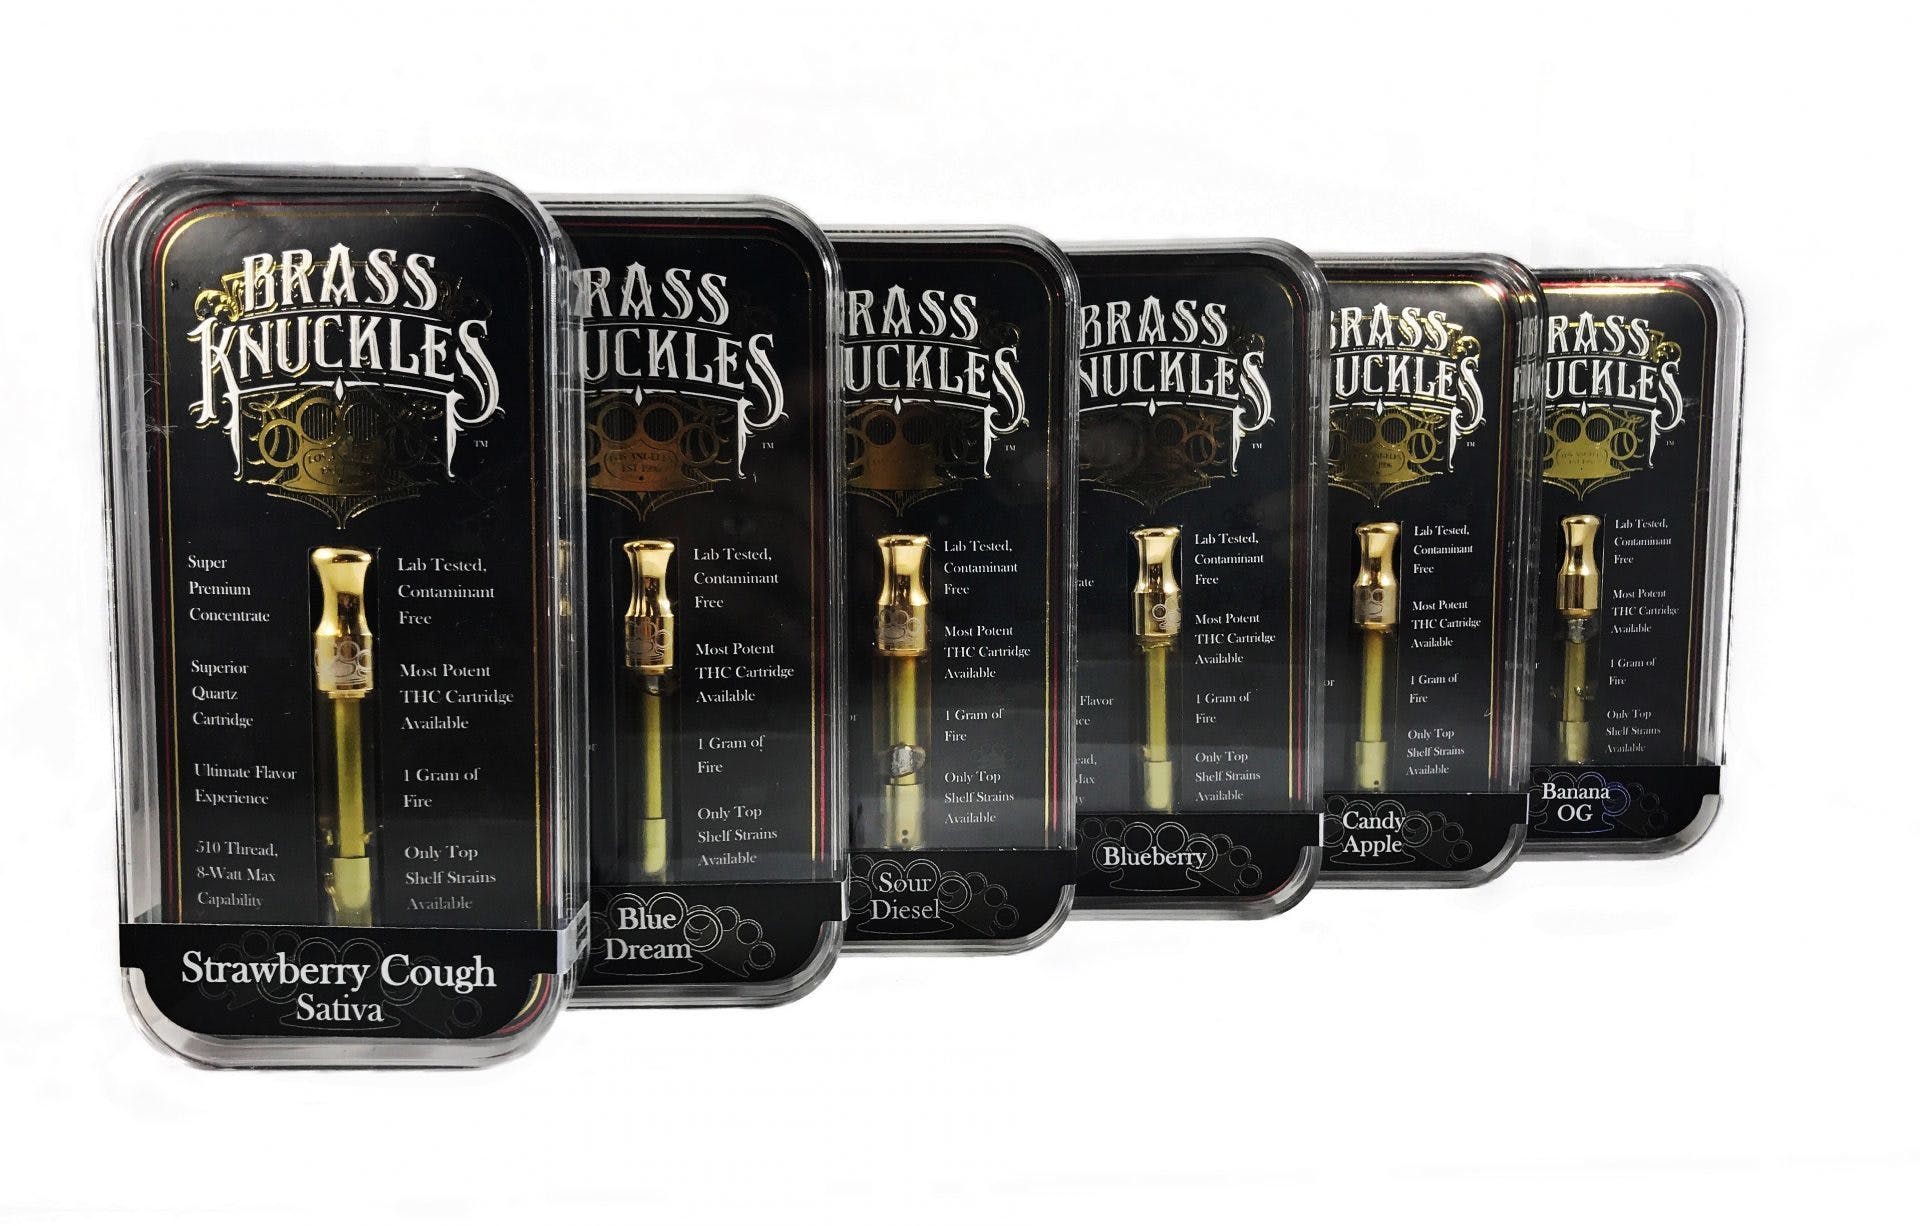 concentrate-brass-knuckles-tahoe-og-3-for-only-90-21-mix-and-match